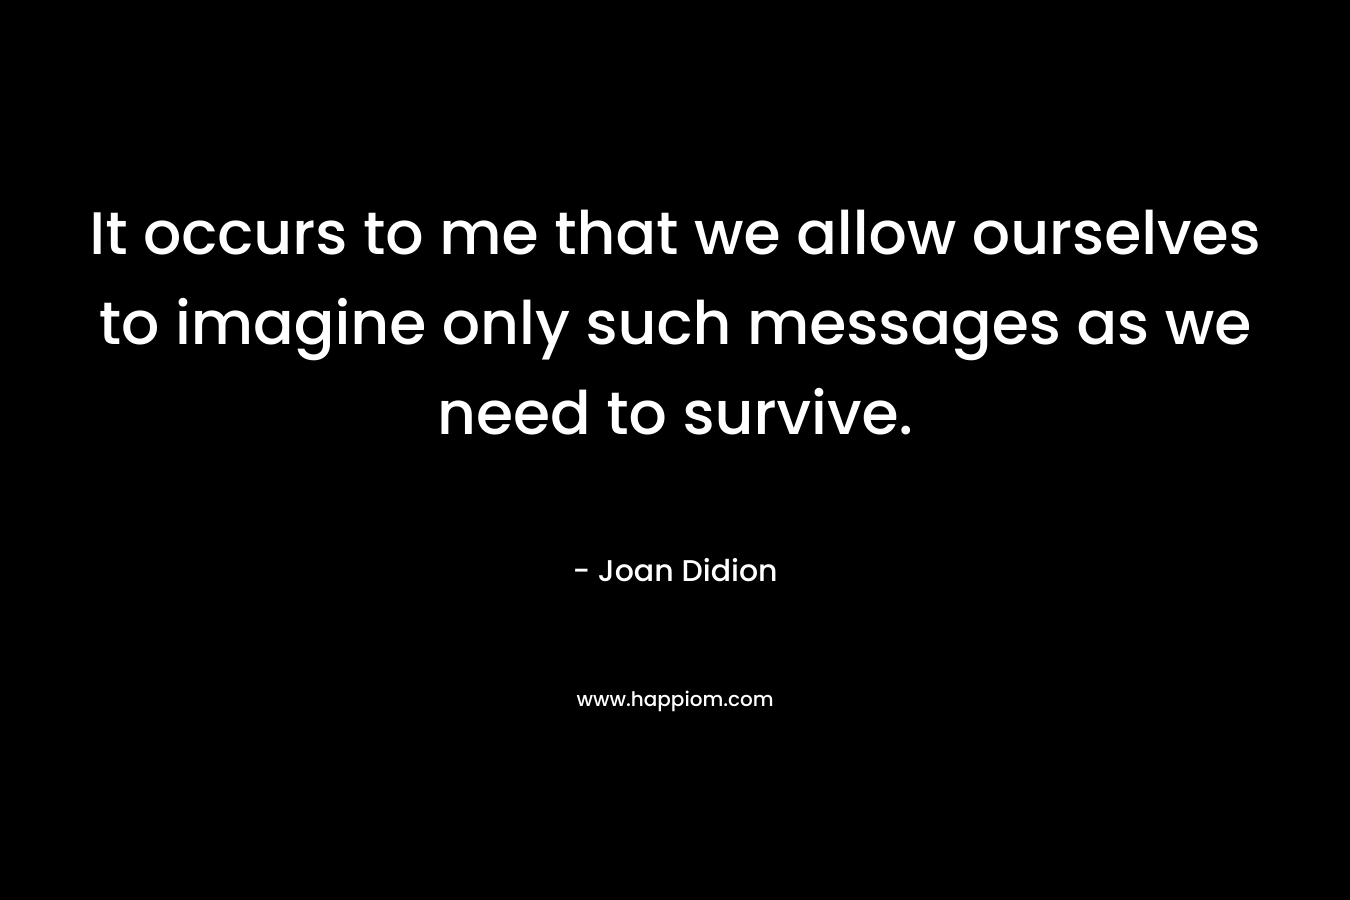 It occurs to me that we allow ourselves to imagine only such messages as we need to survive.